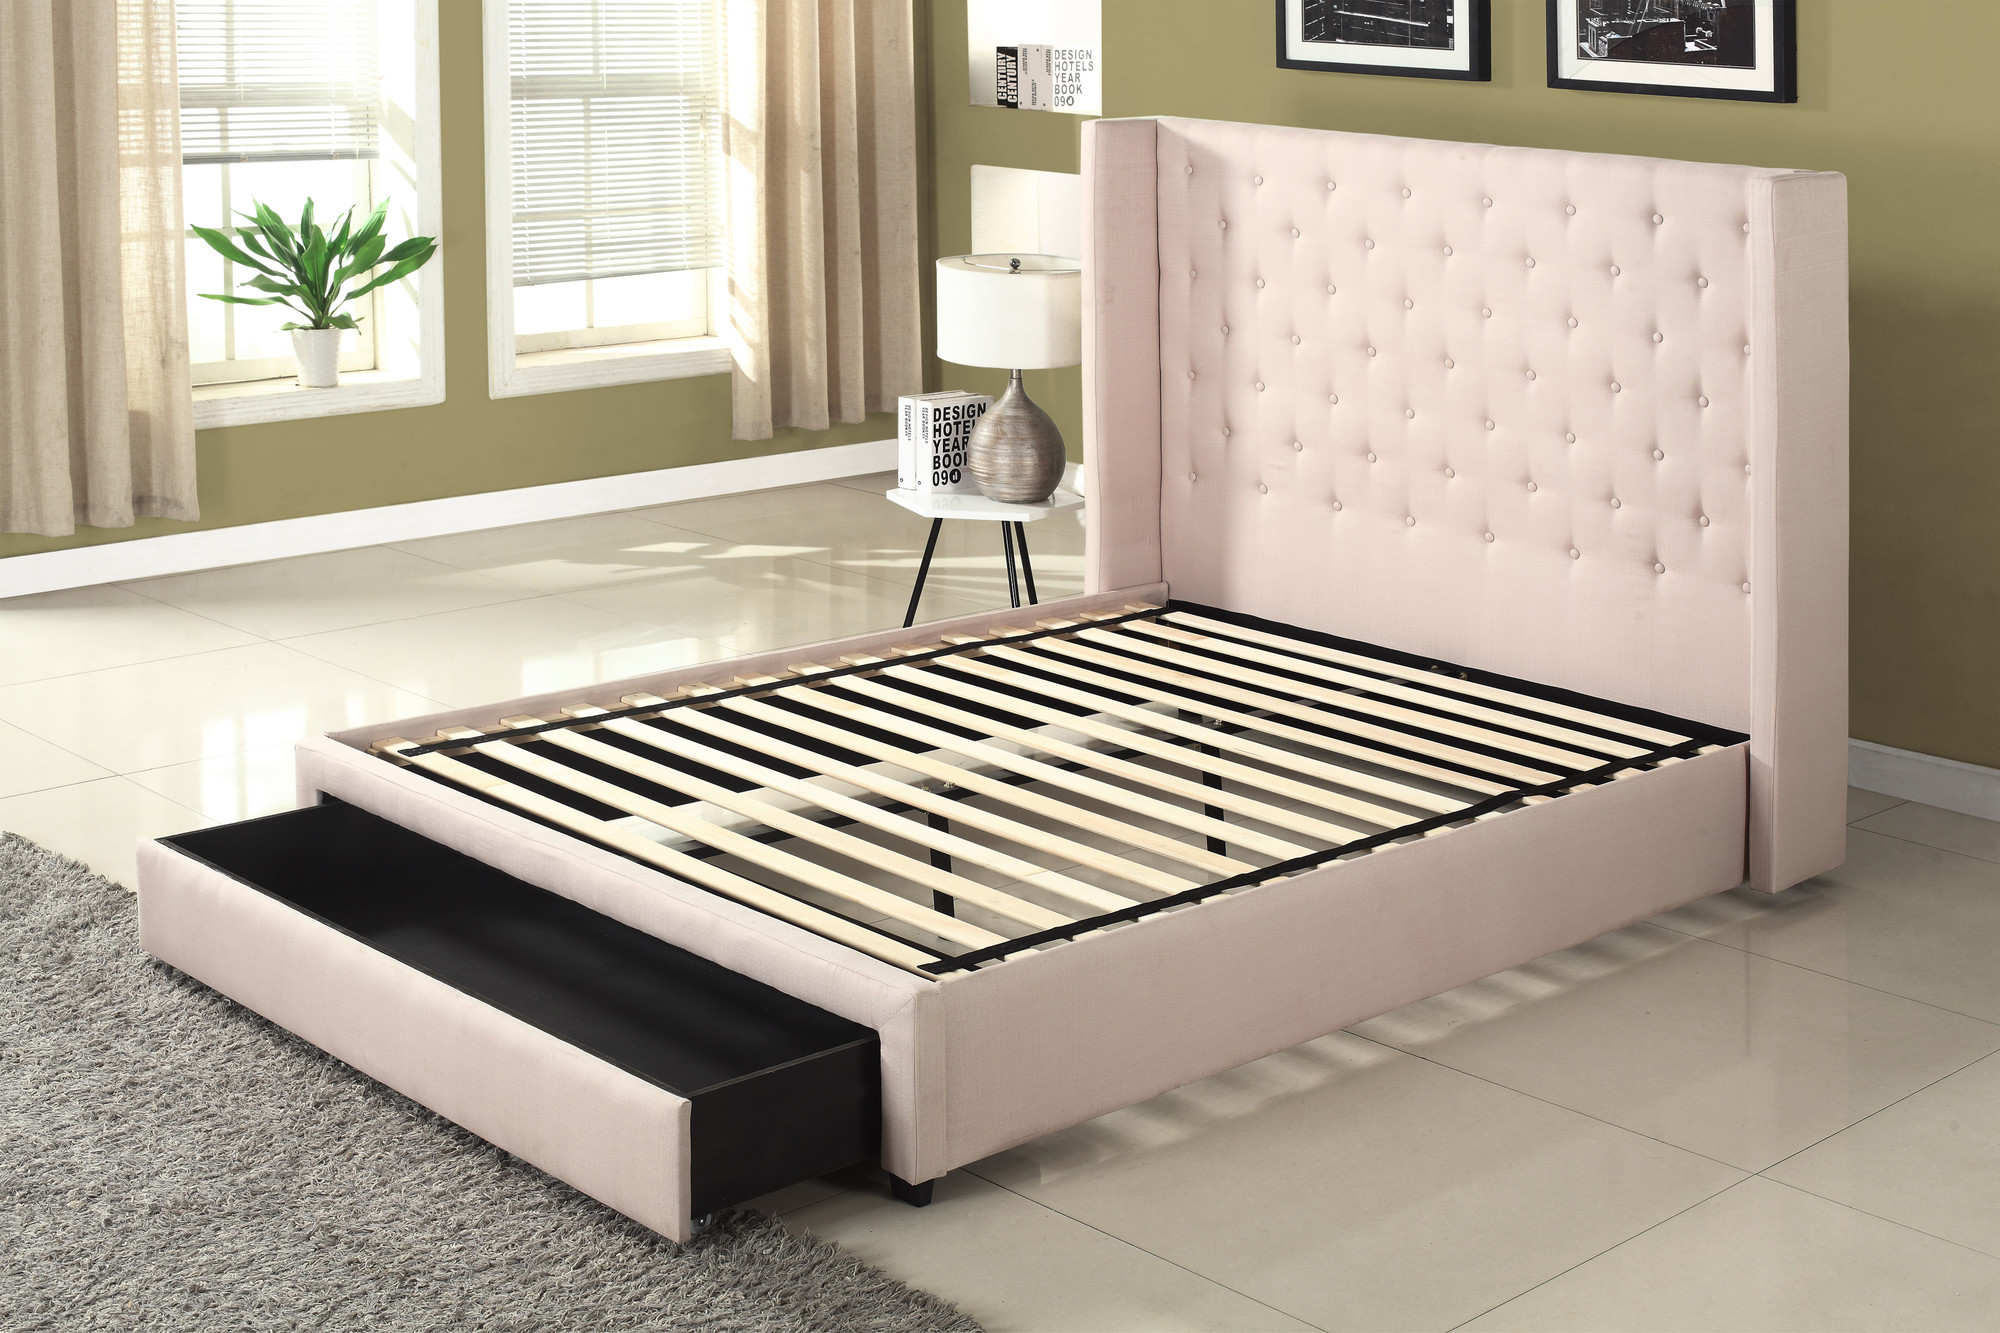 NEW Ivory Button Tufted Wing Queen Size Bed Frame with Drawer | eBay